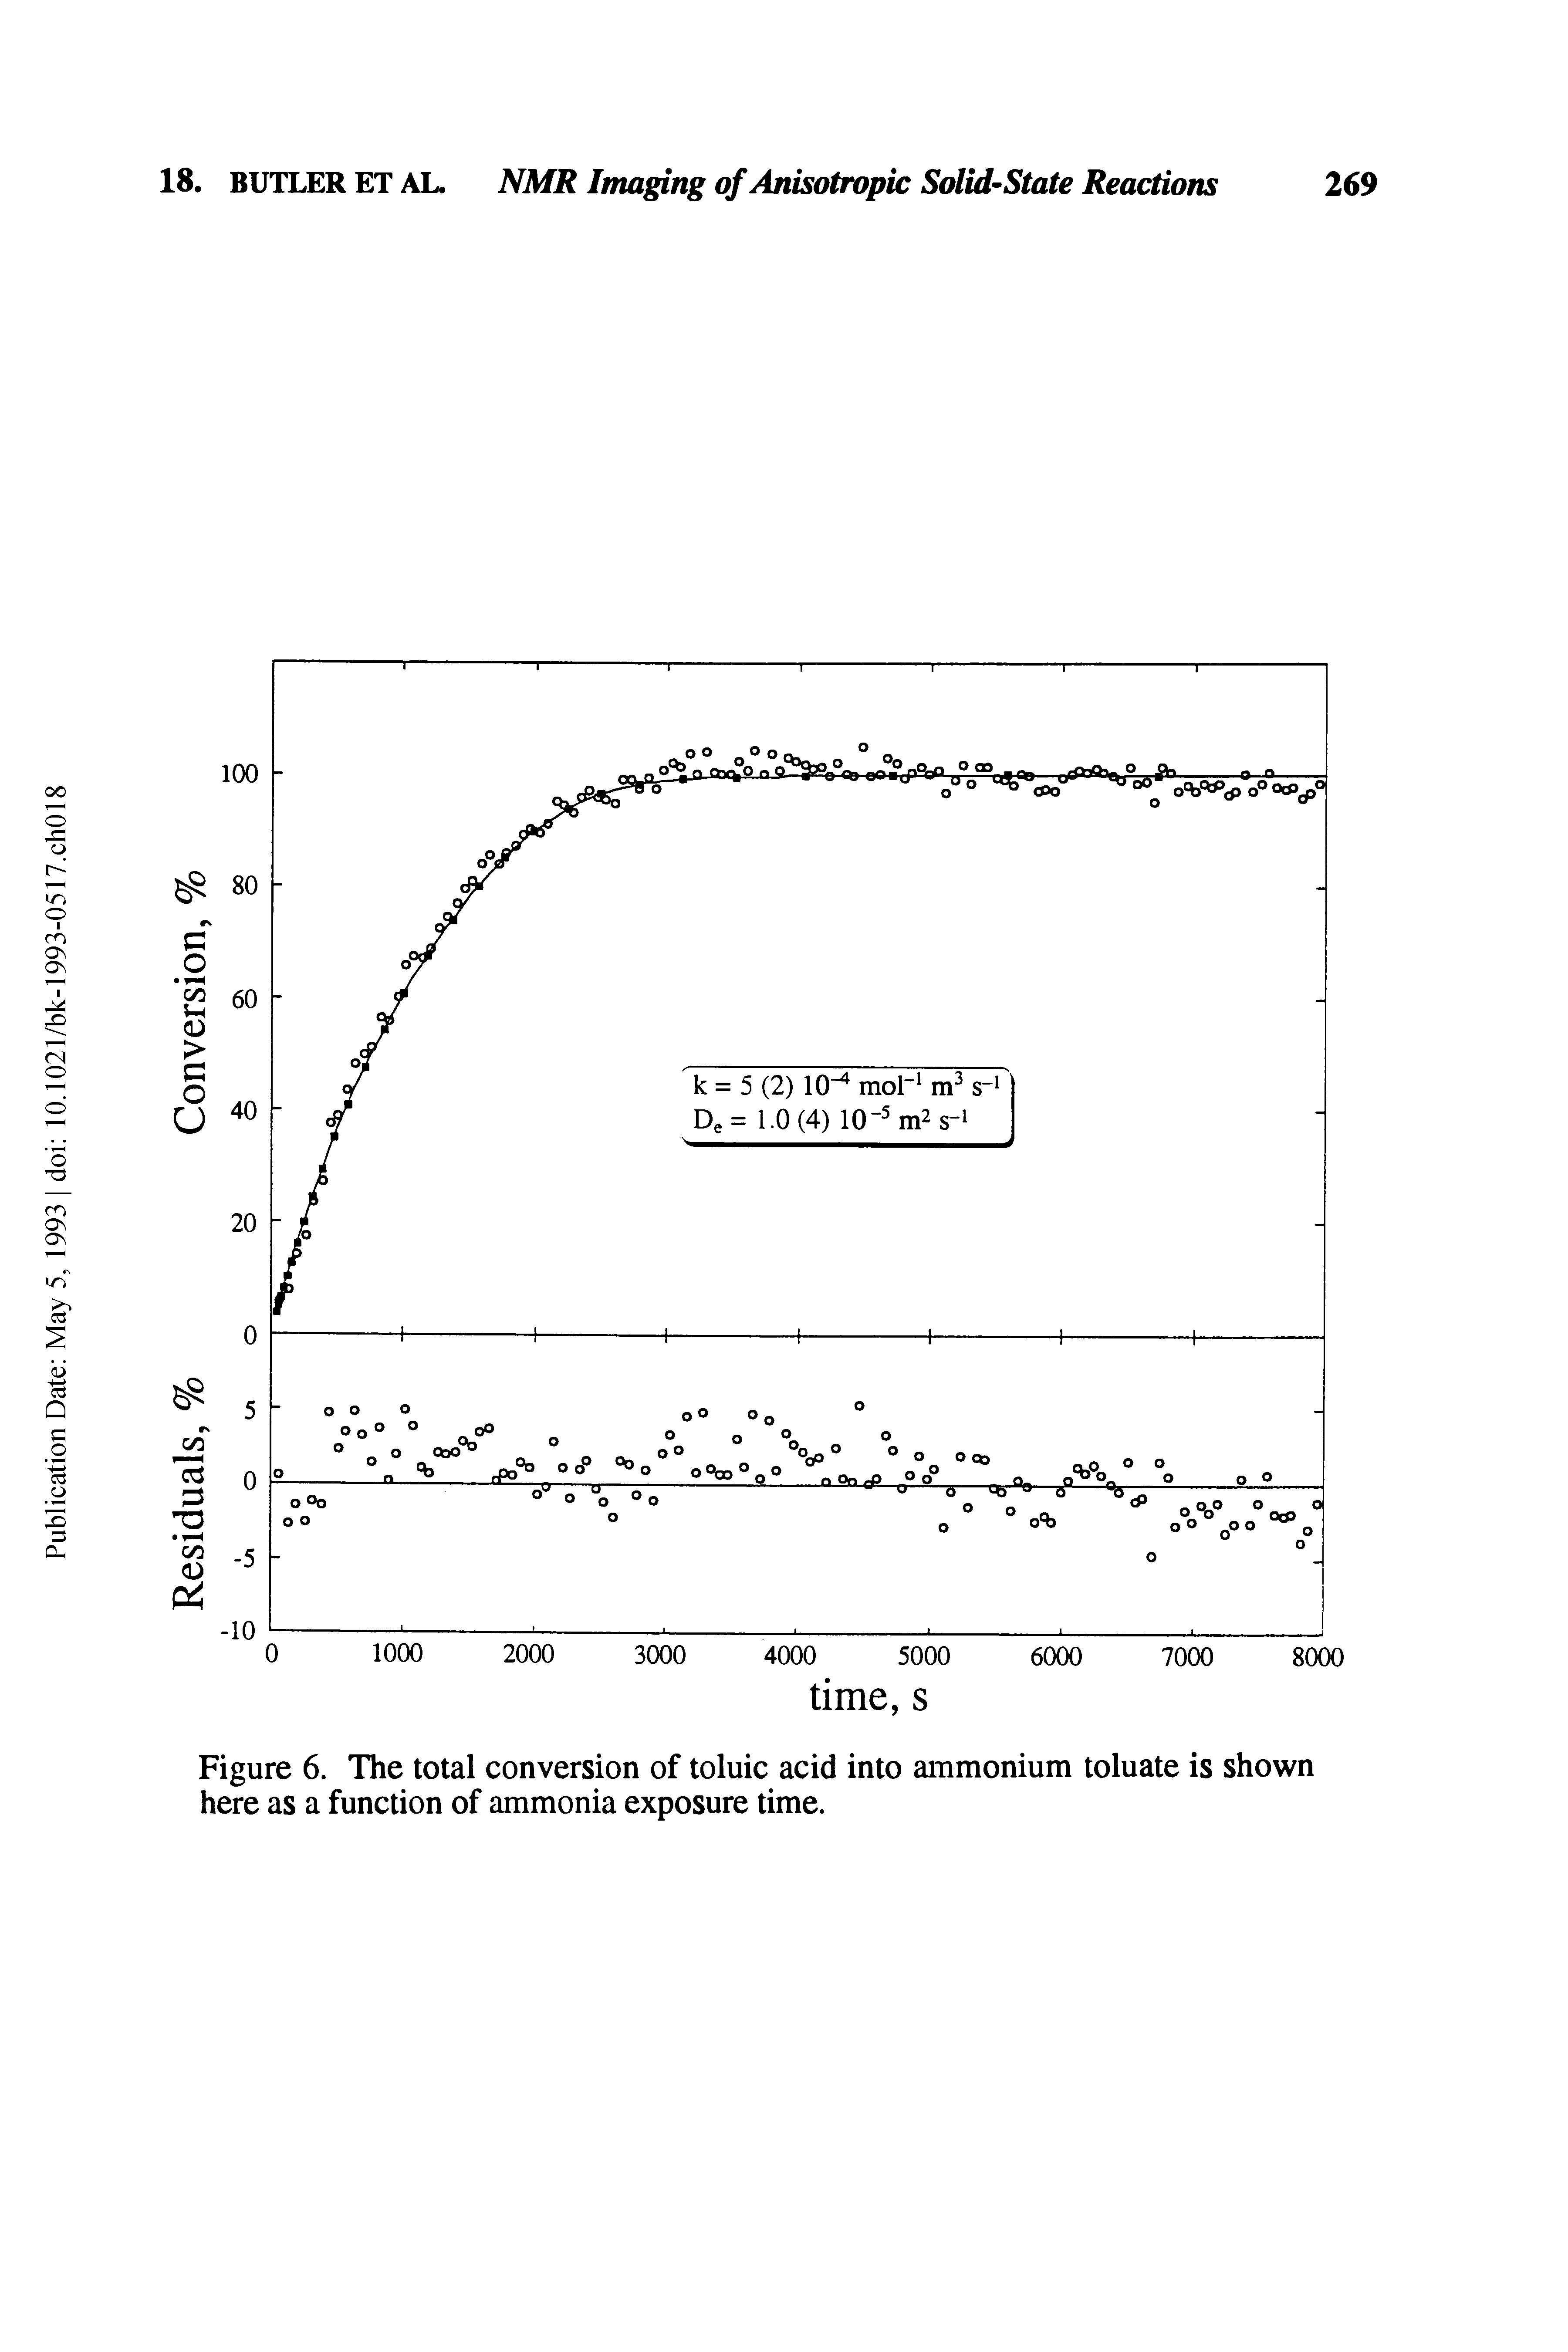 Figure 6. The total conversion of toluic acid into ammonium toluate is shown here as a function of ammonia exposure time.